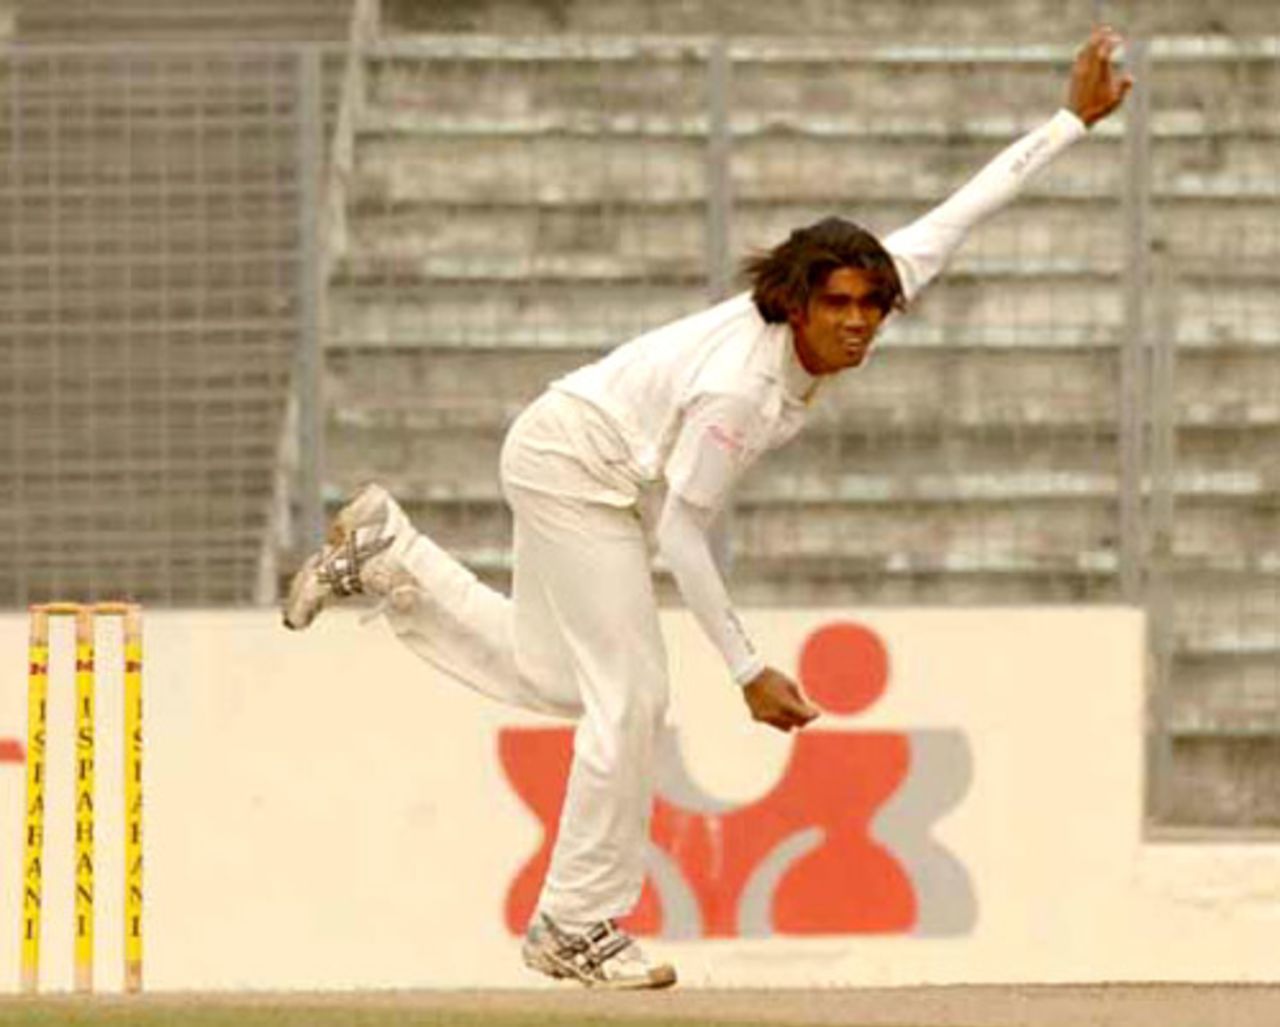 Mahbubul Alam picked up three wickets in Barisal's first innings, Dhaka v Barisal, National Cricket League, 3rd day, Fatullah, December 16, 2007